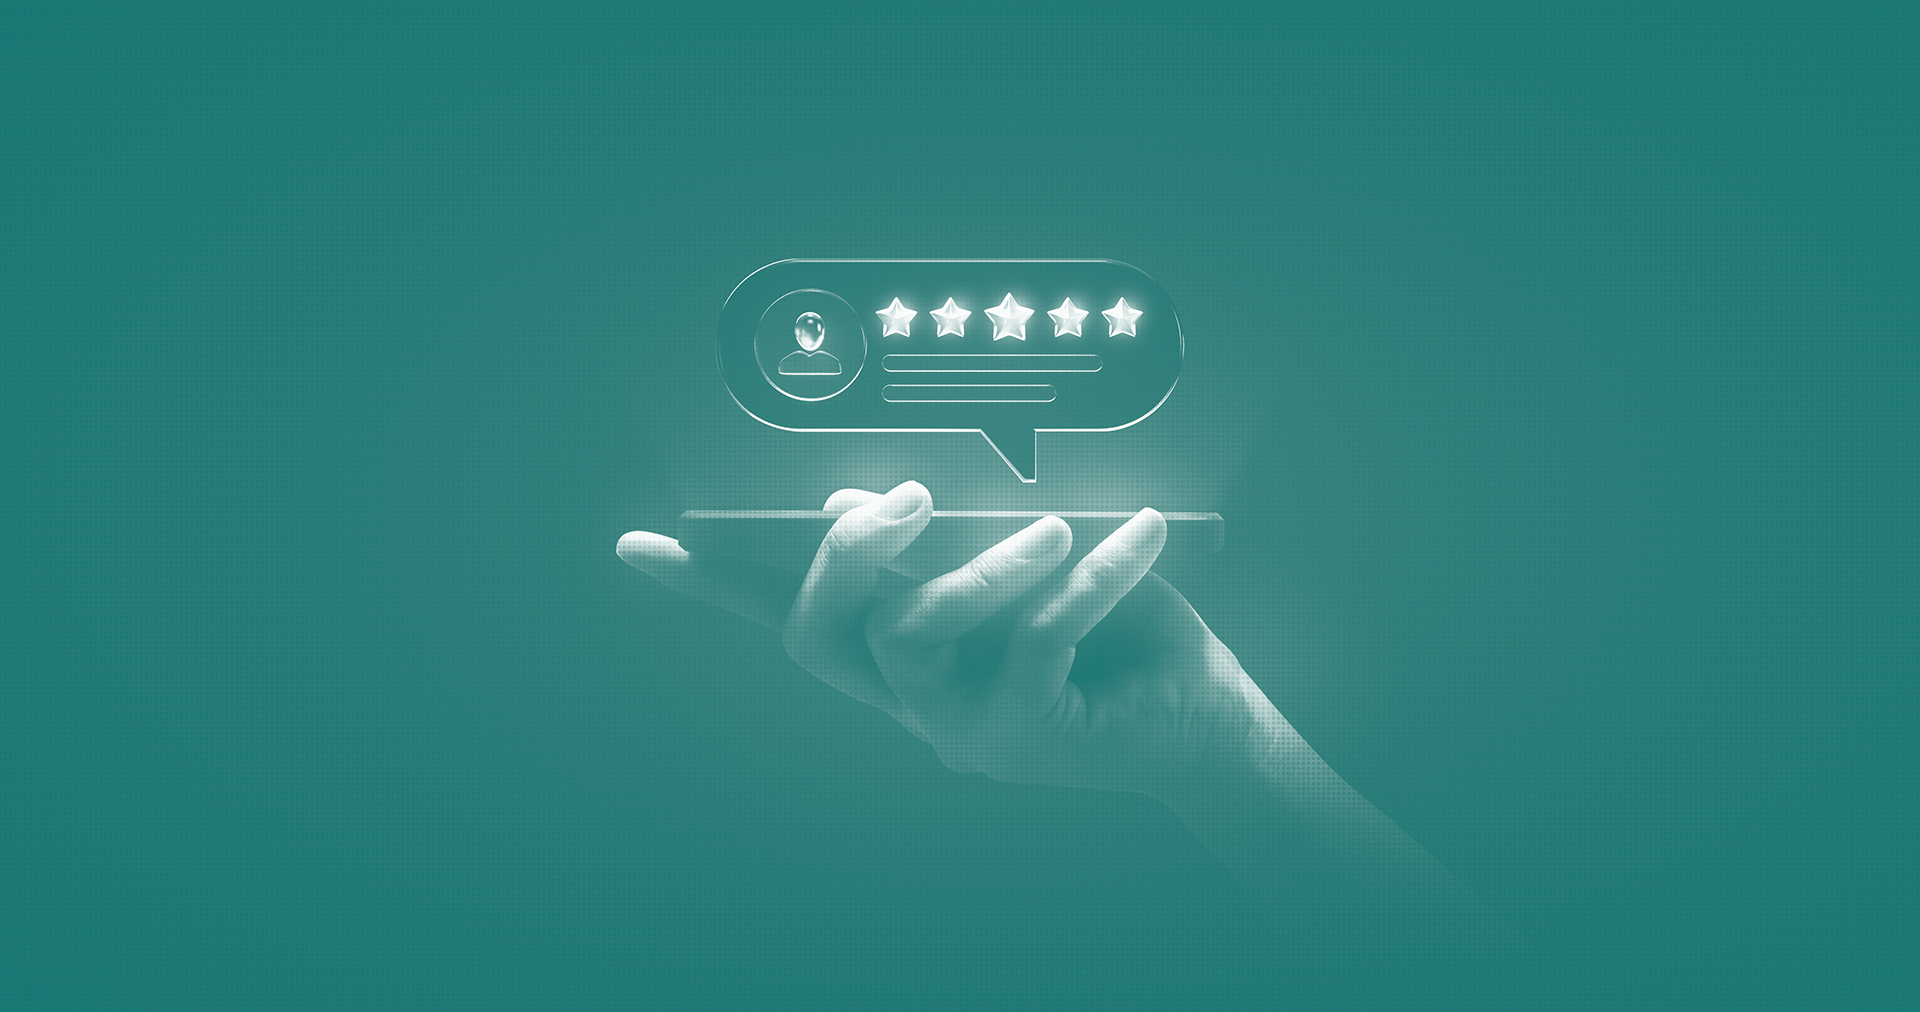 illustration of a hand holding a smart phone with a floating word bubble containing five stars to represent a favorable review